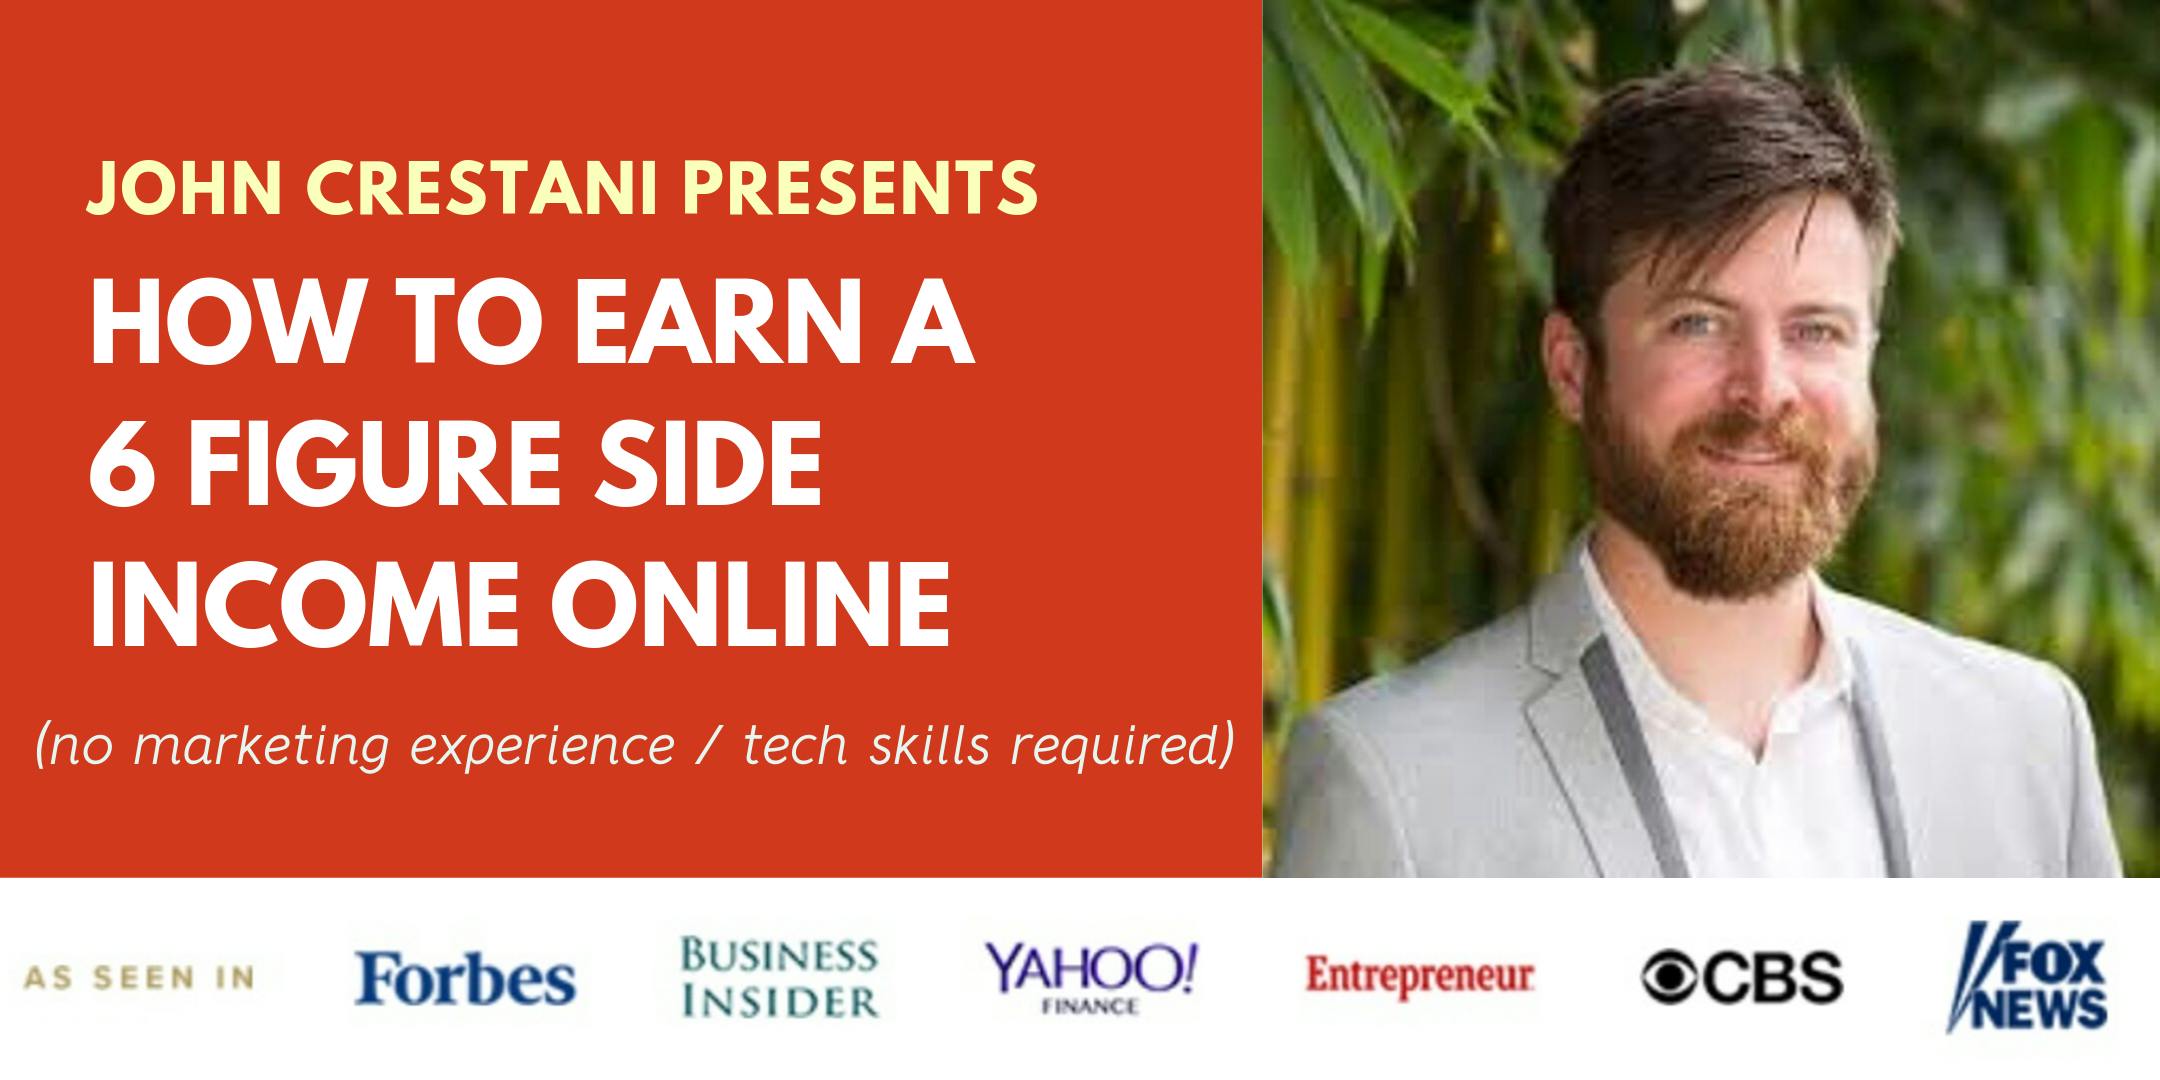 How To Earn a 6 Figure Side Income Online [WEBINAR] 【Featured on Forbes】